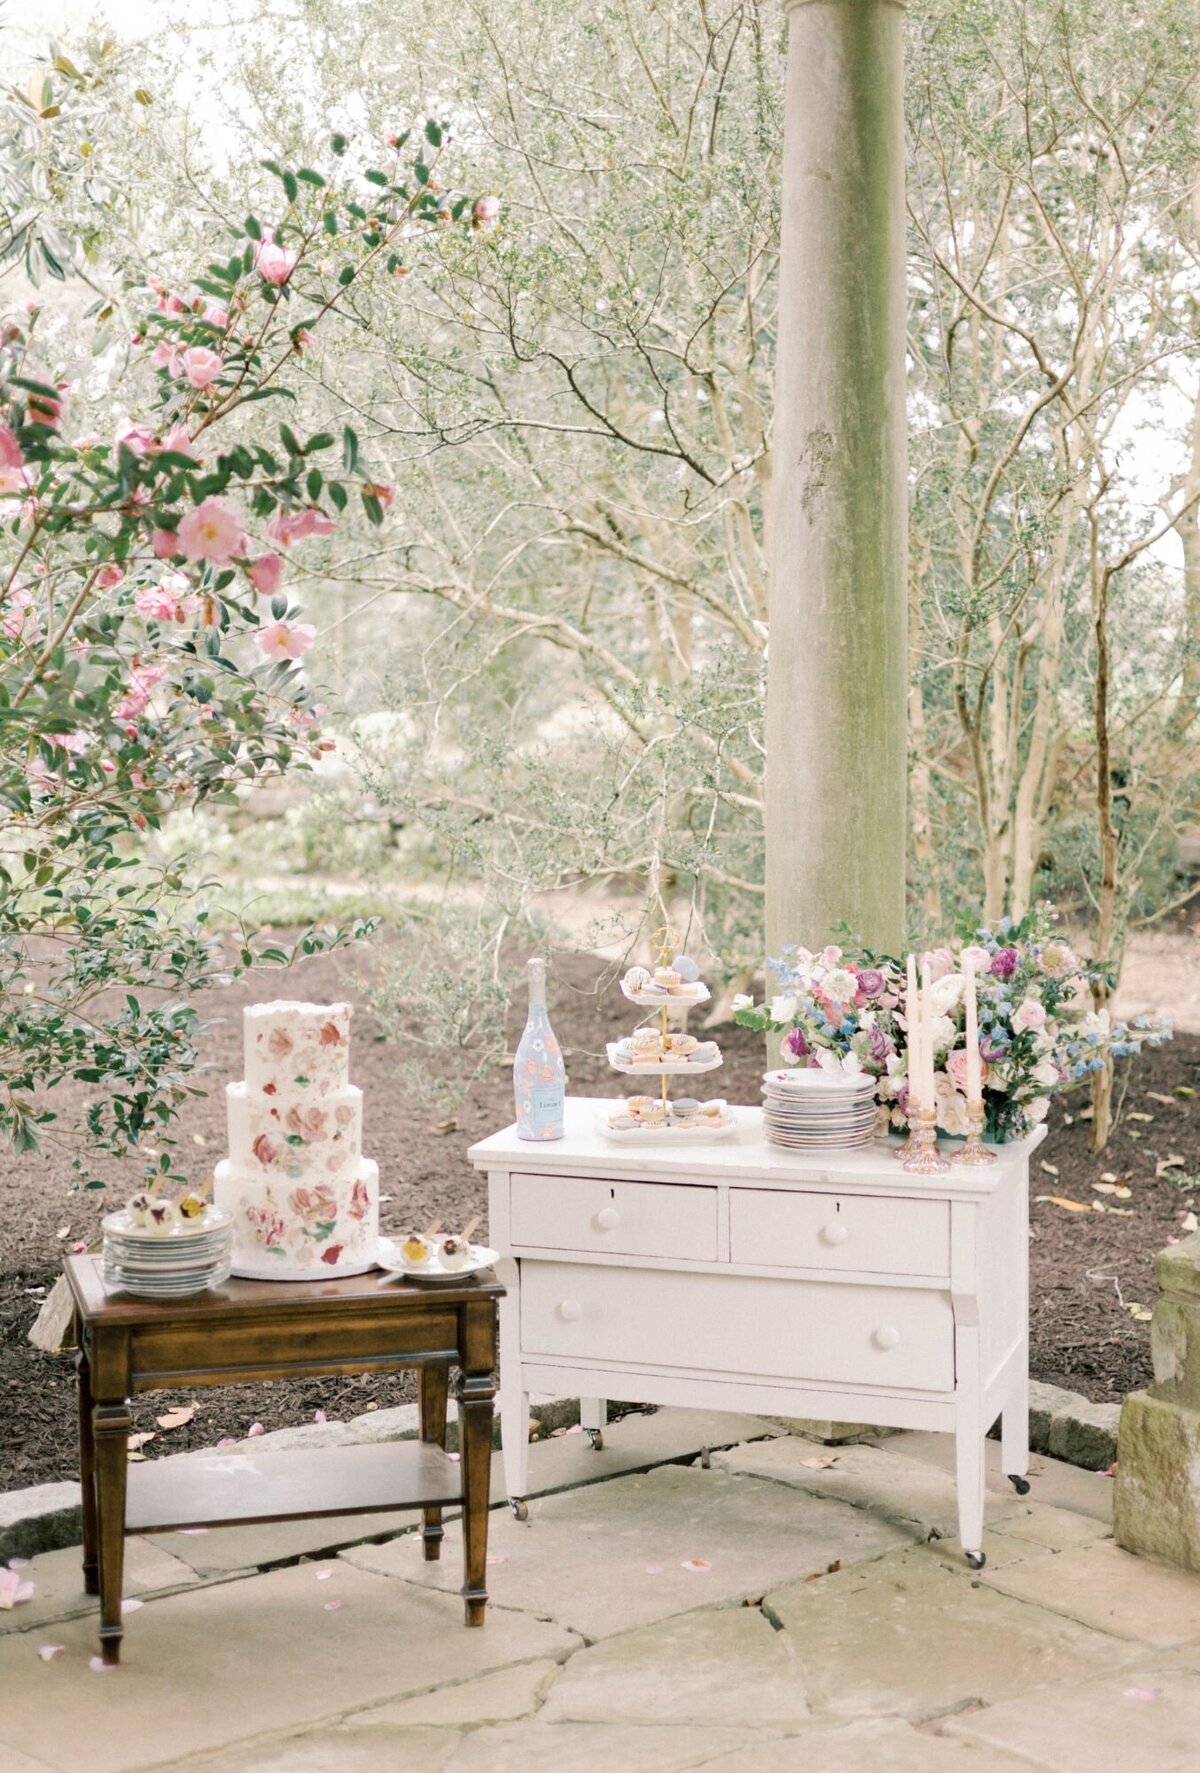 Wedding cake and dessert table on vintage tables.